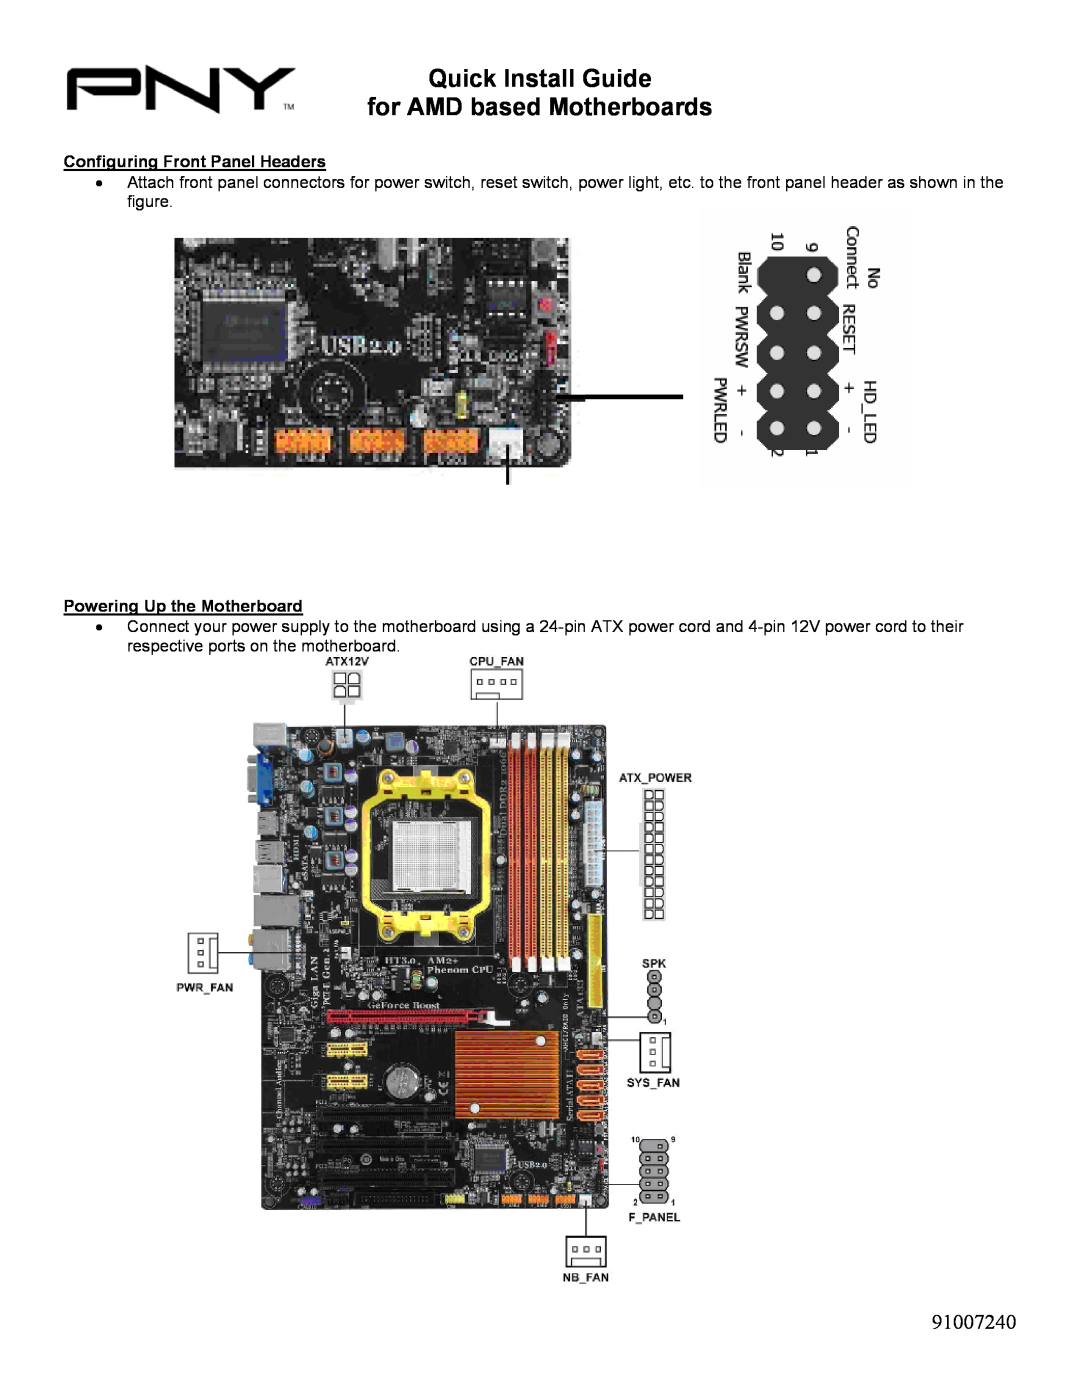 PNY 91007240 Configuring Front Panel Headers, Powering Up the Motherboard, Quick Install Guide for AMD based Motherboards 